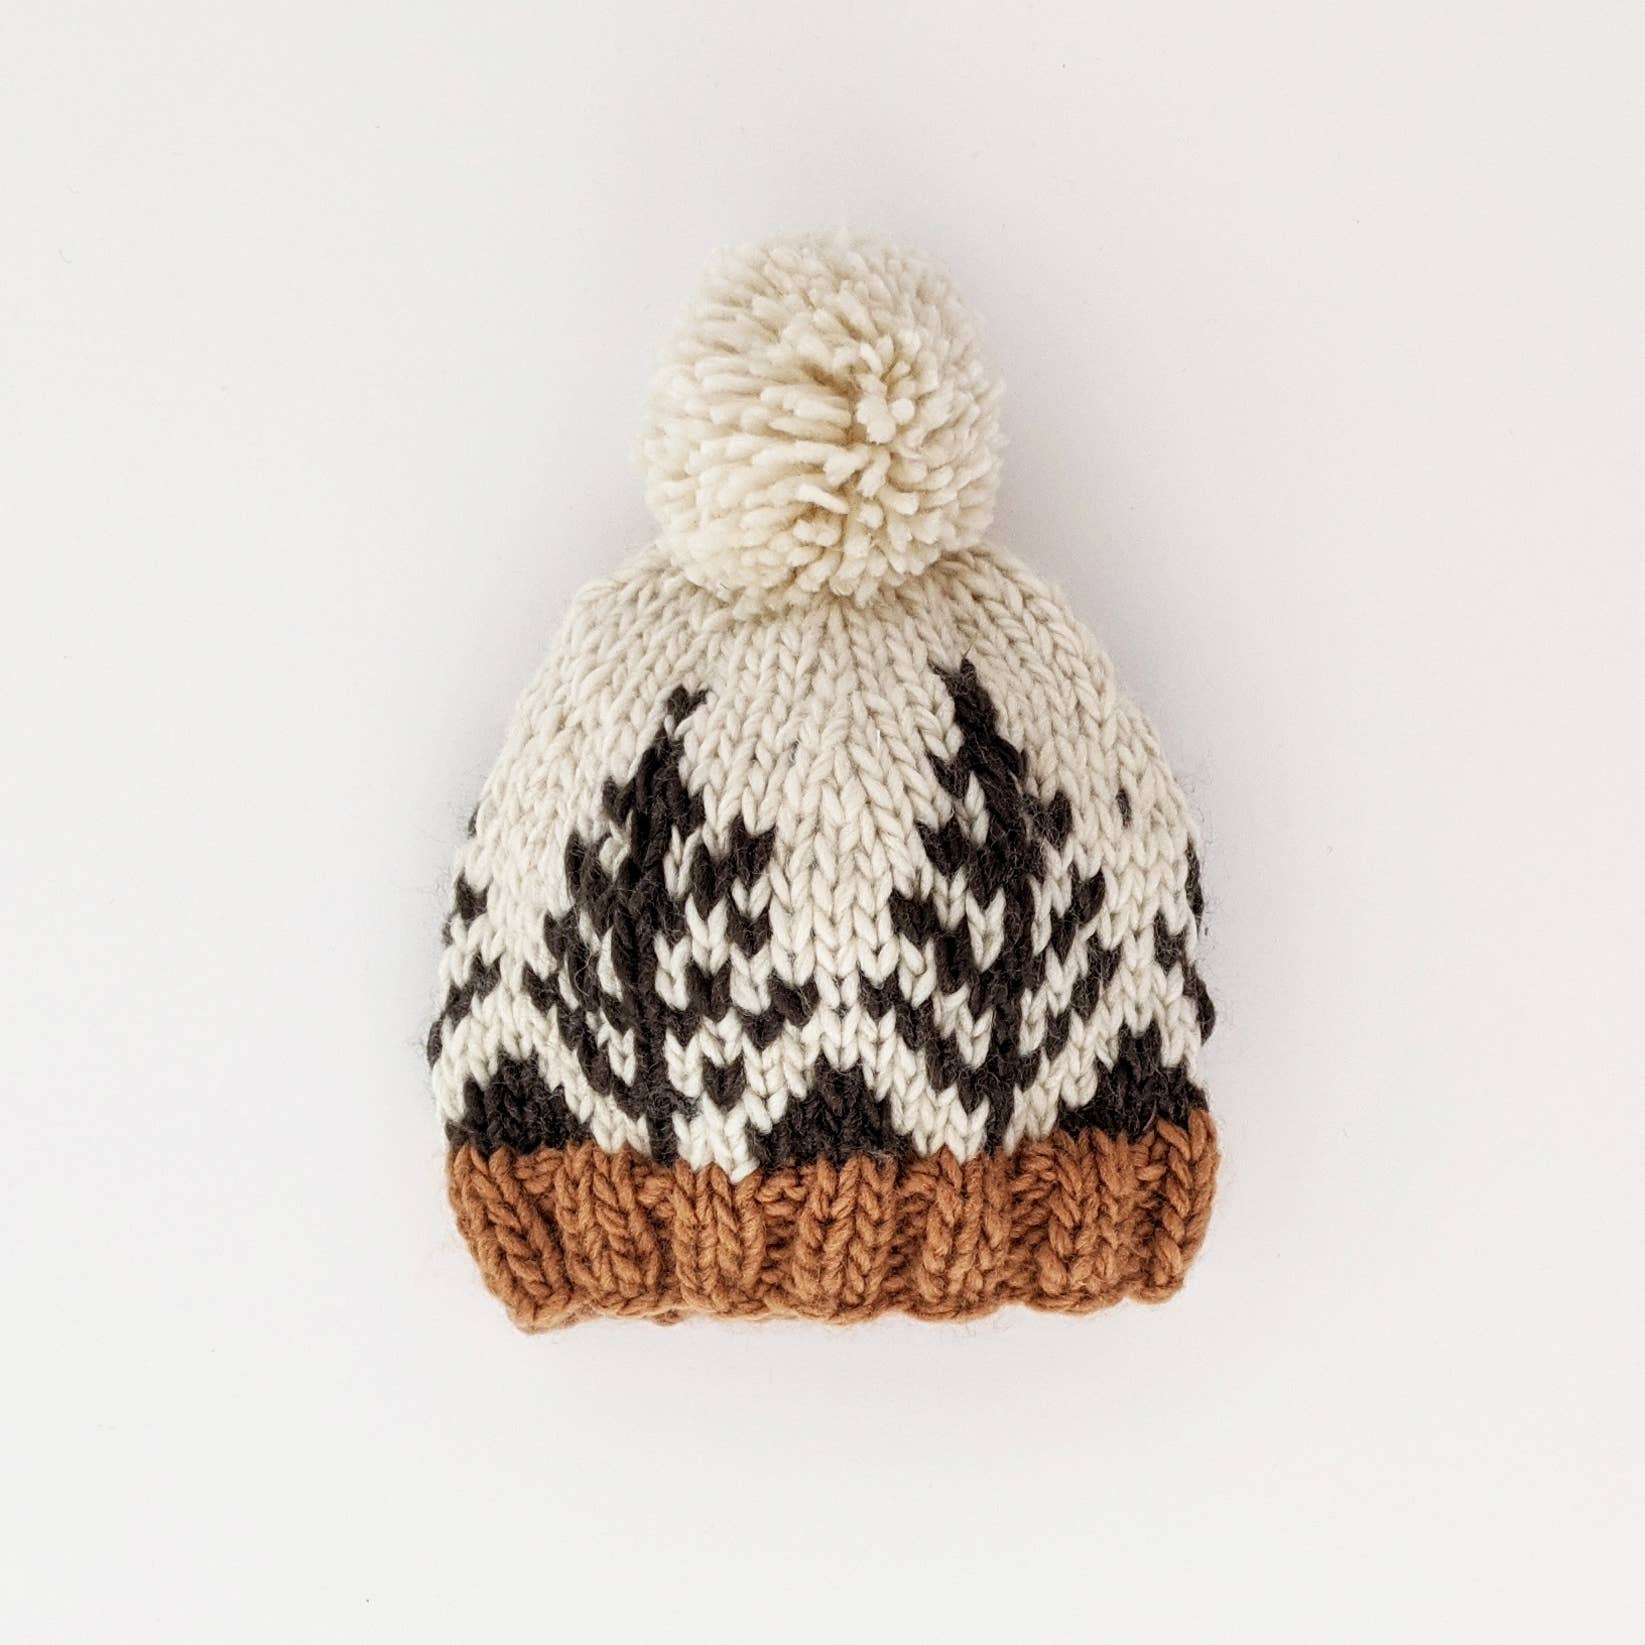 Huggalugs - Forest Knit Beanie Hat: L (2-6 years)